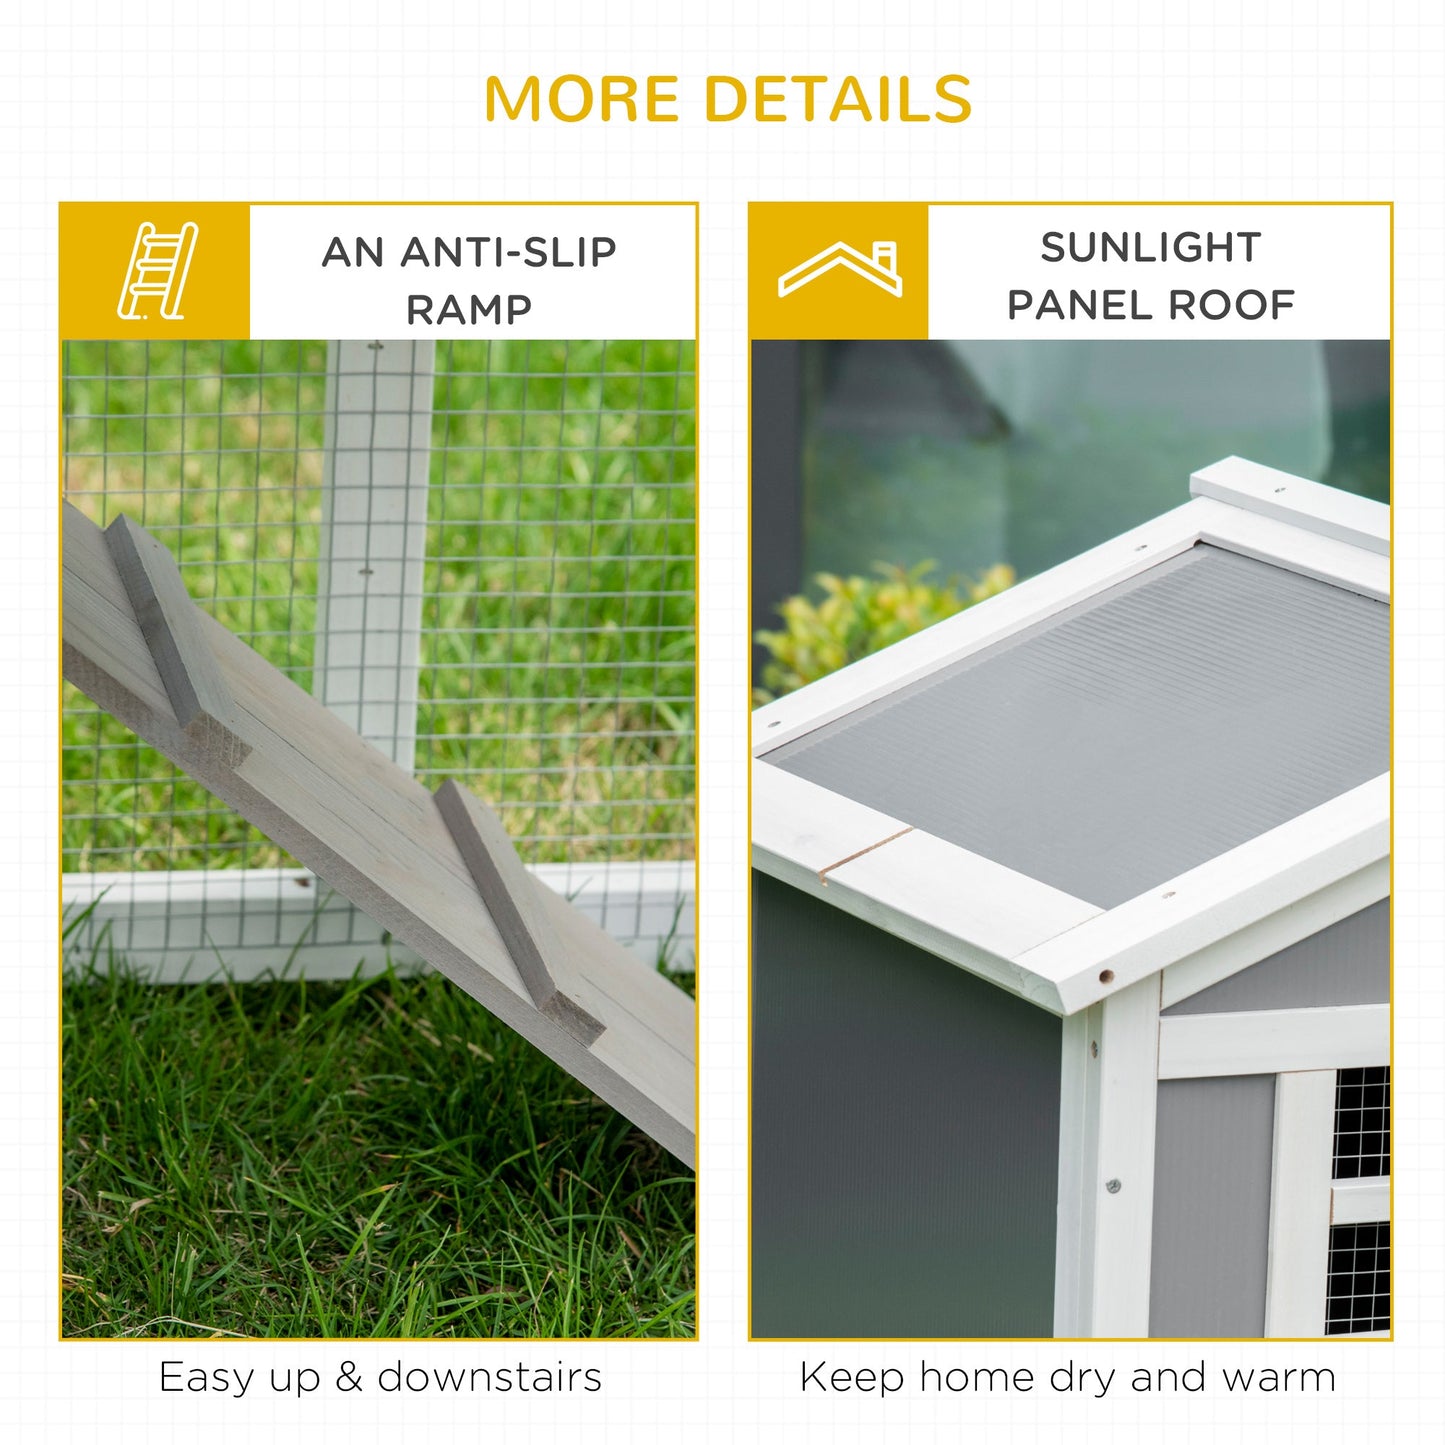 PawHut Wooden Rabbit Hutch, 2 Tier Guinea Pig Cage, Bunny Run, Small Animal House for Indoor Outdoor with Sunlight Panel Roof Slide-out Tray, 150 x 66 x 100cm, Grey